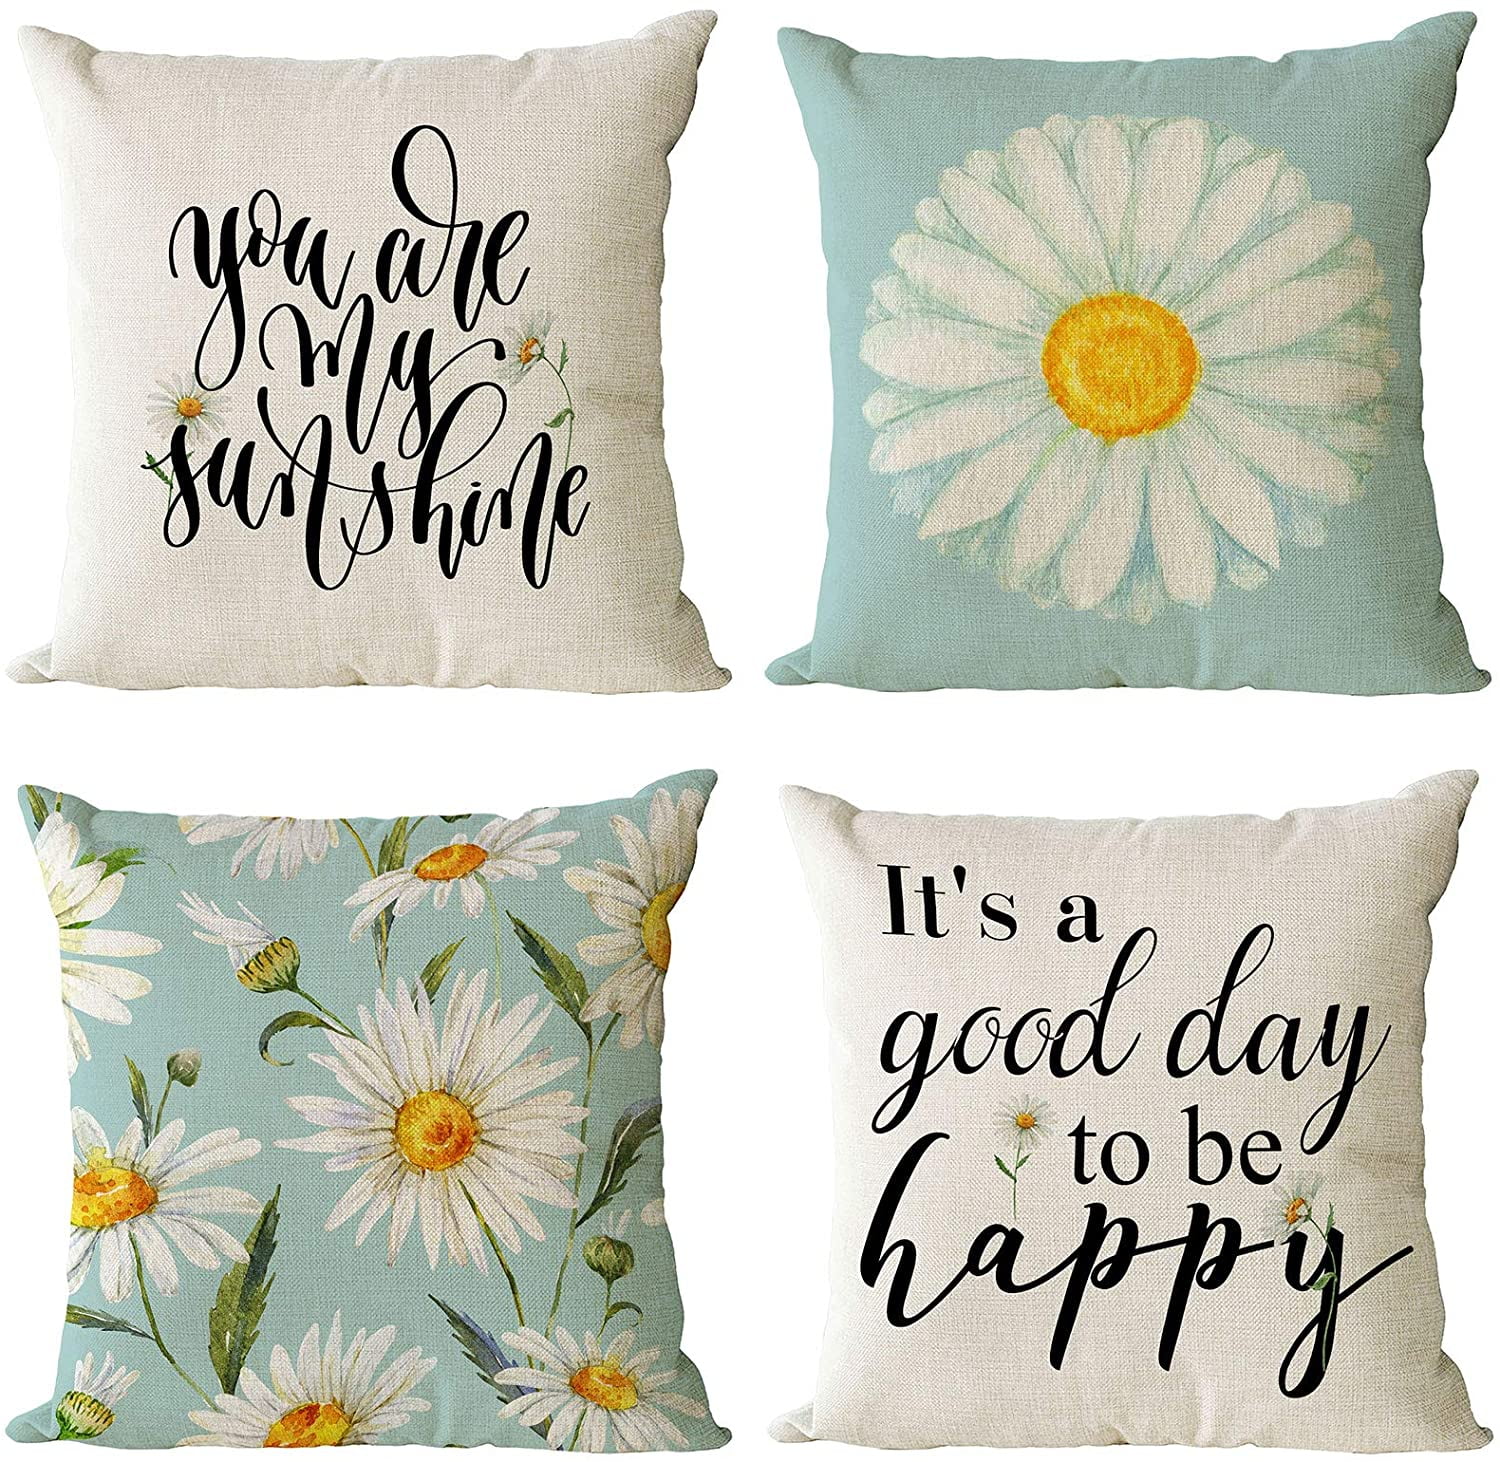 Personalised Home Sweet Home Botanical Design New Home Quote cover Linen Style Cushion decor